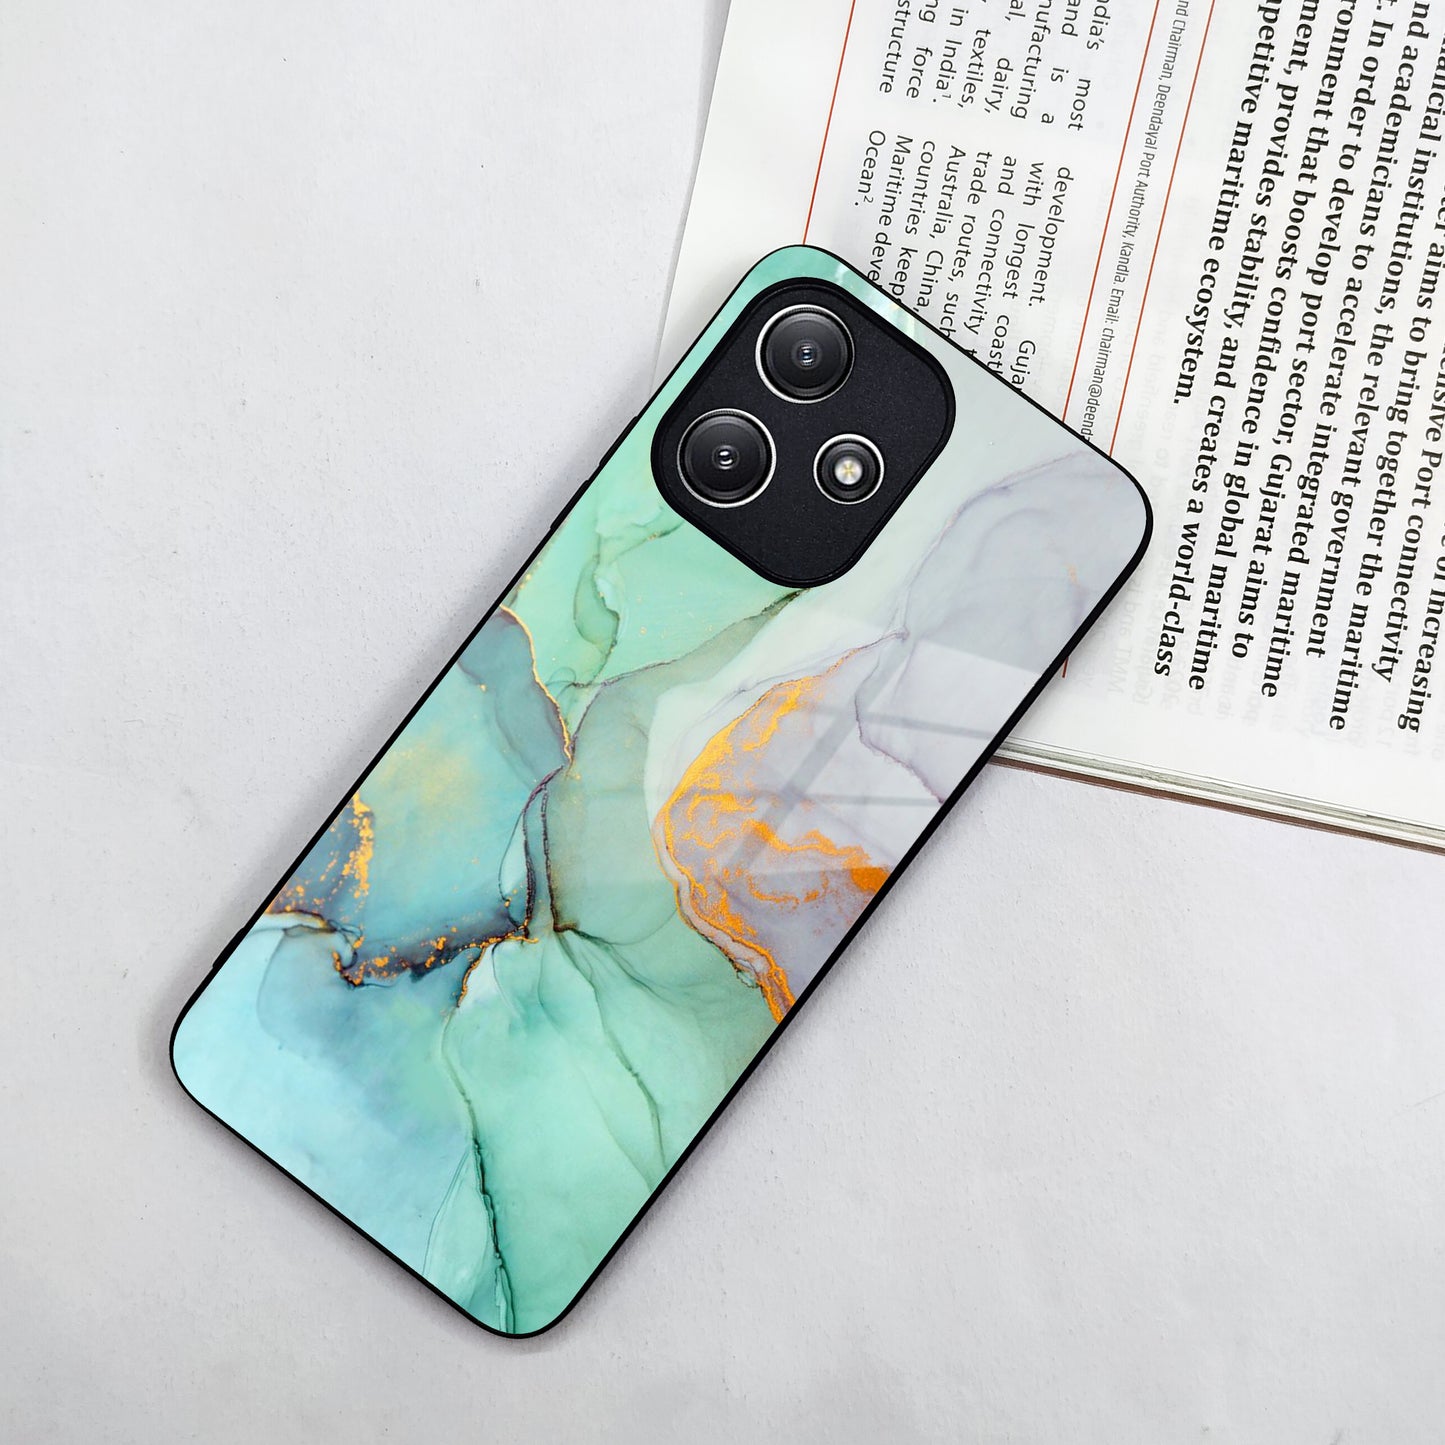 Marble Glass Finish Phone Case And Cover For Redmi/Xiaomi